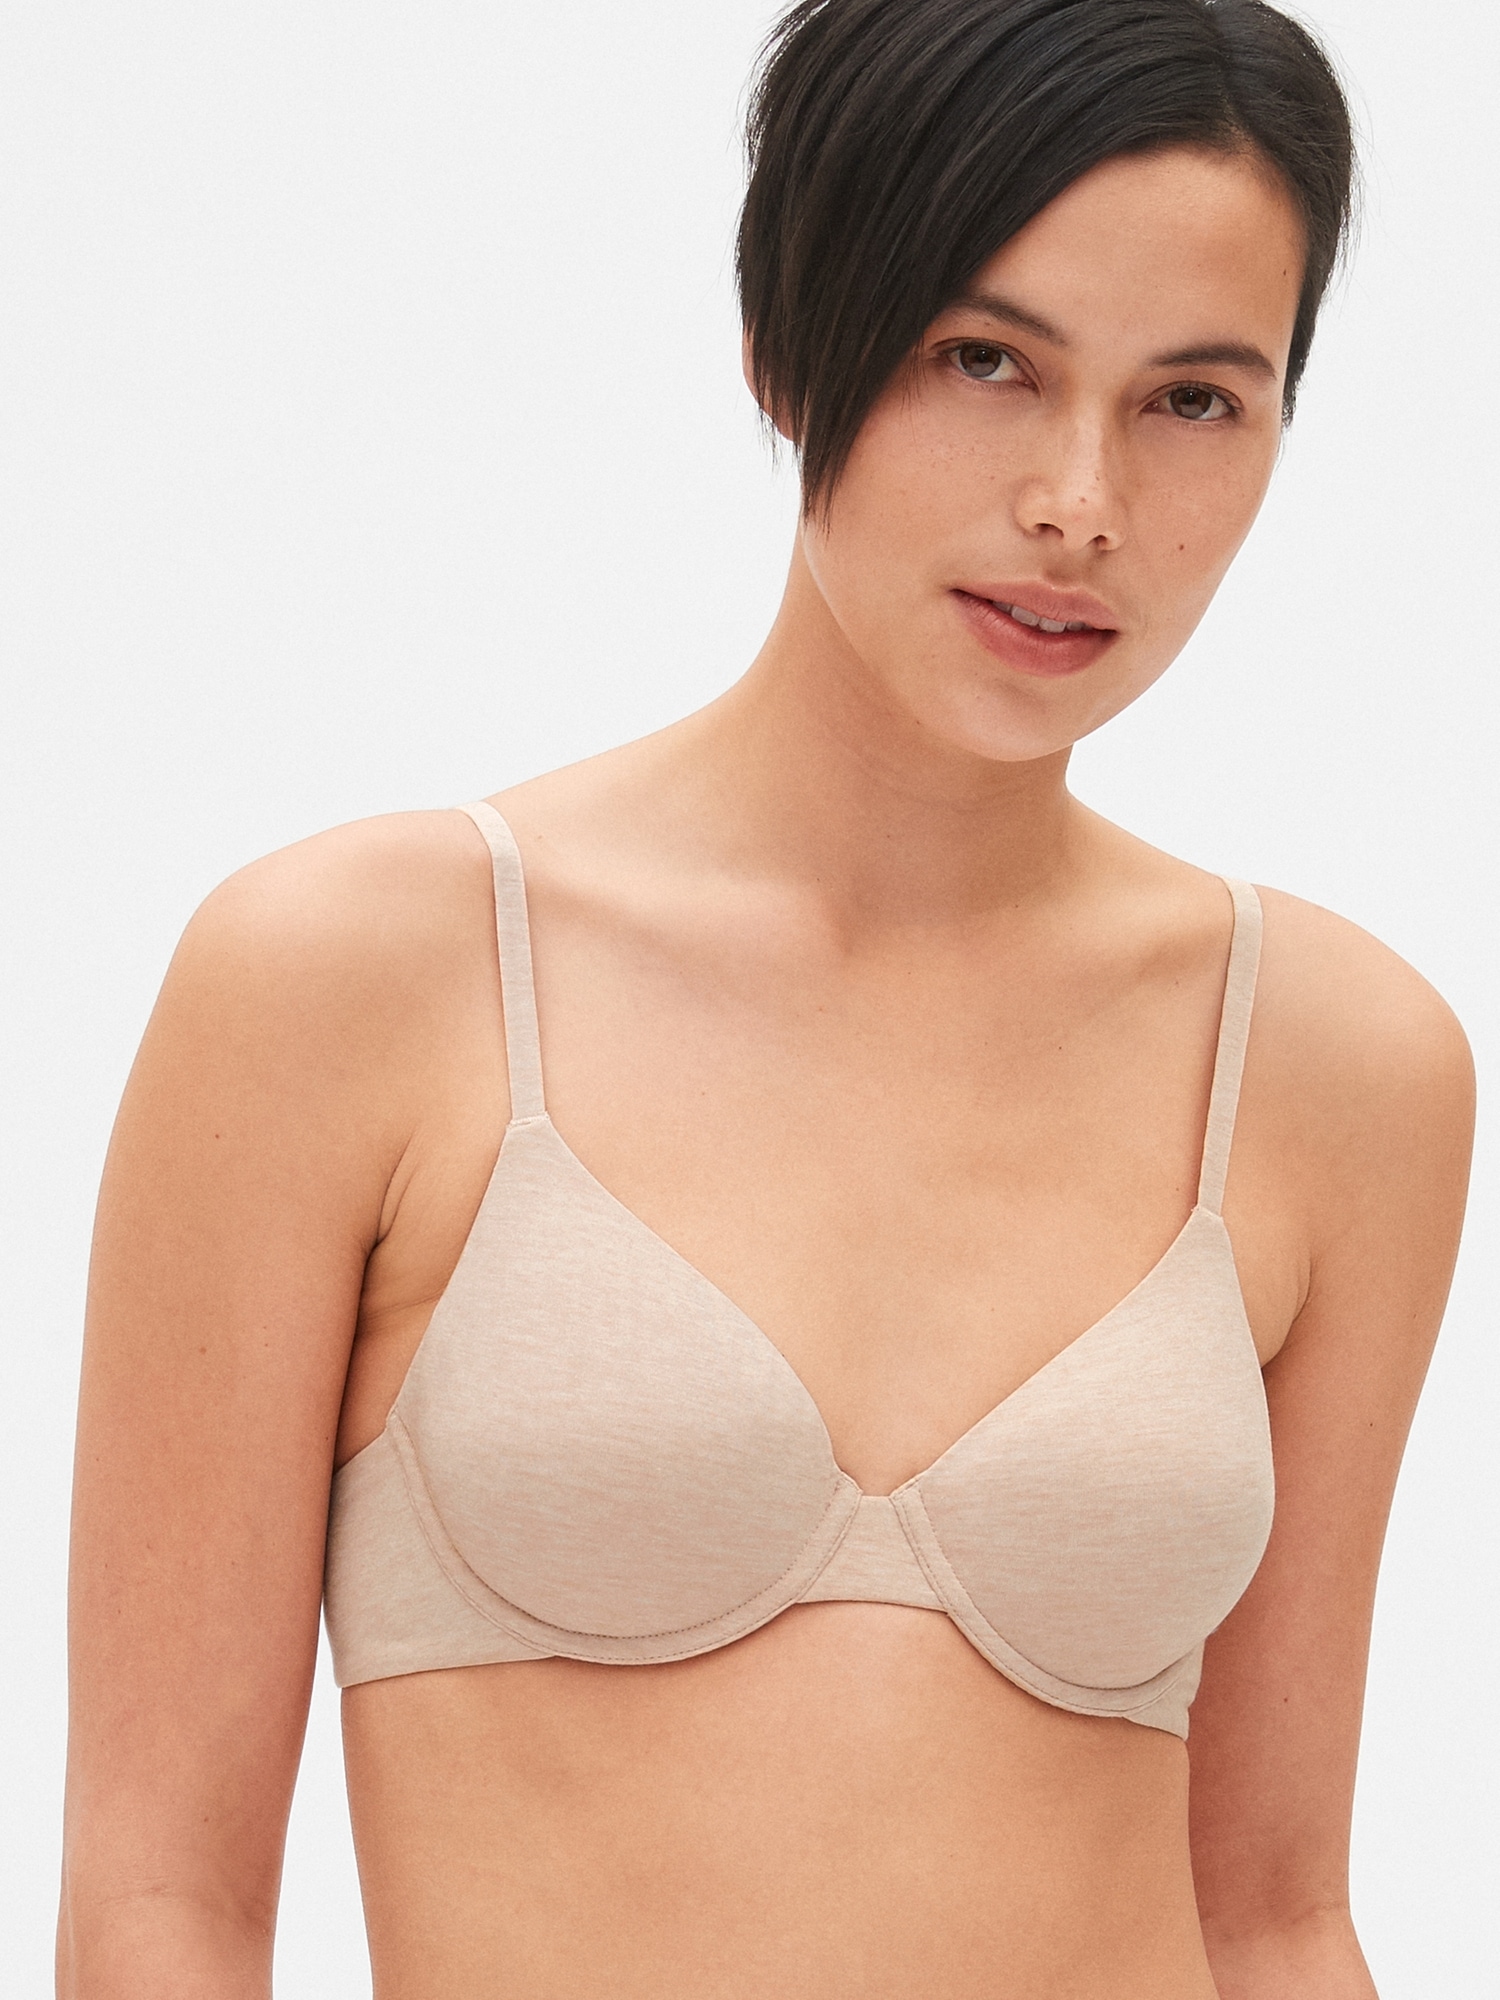 Buy MILLION REASONS OF COMFORT CORAL NON WIRED NON PADDED BRA for